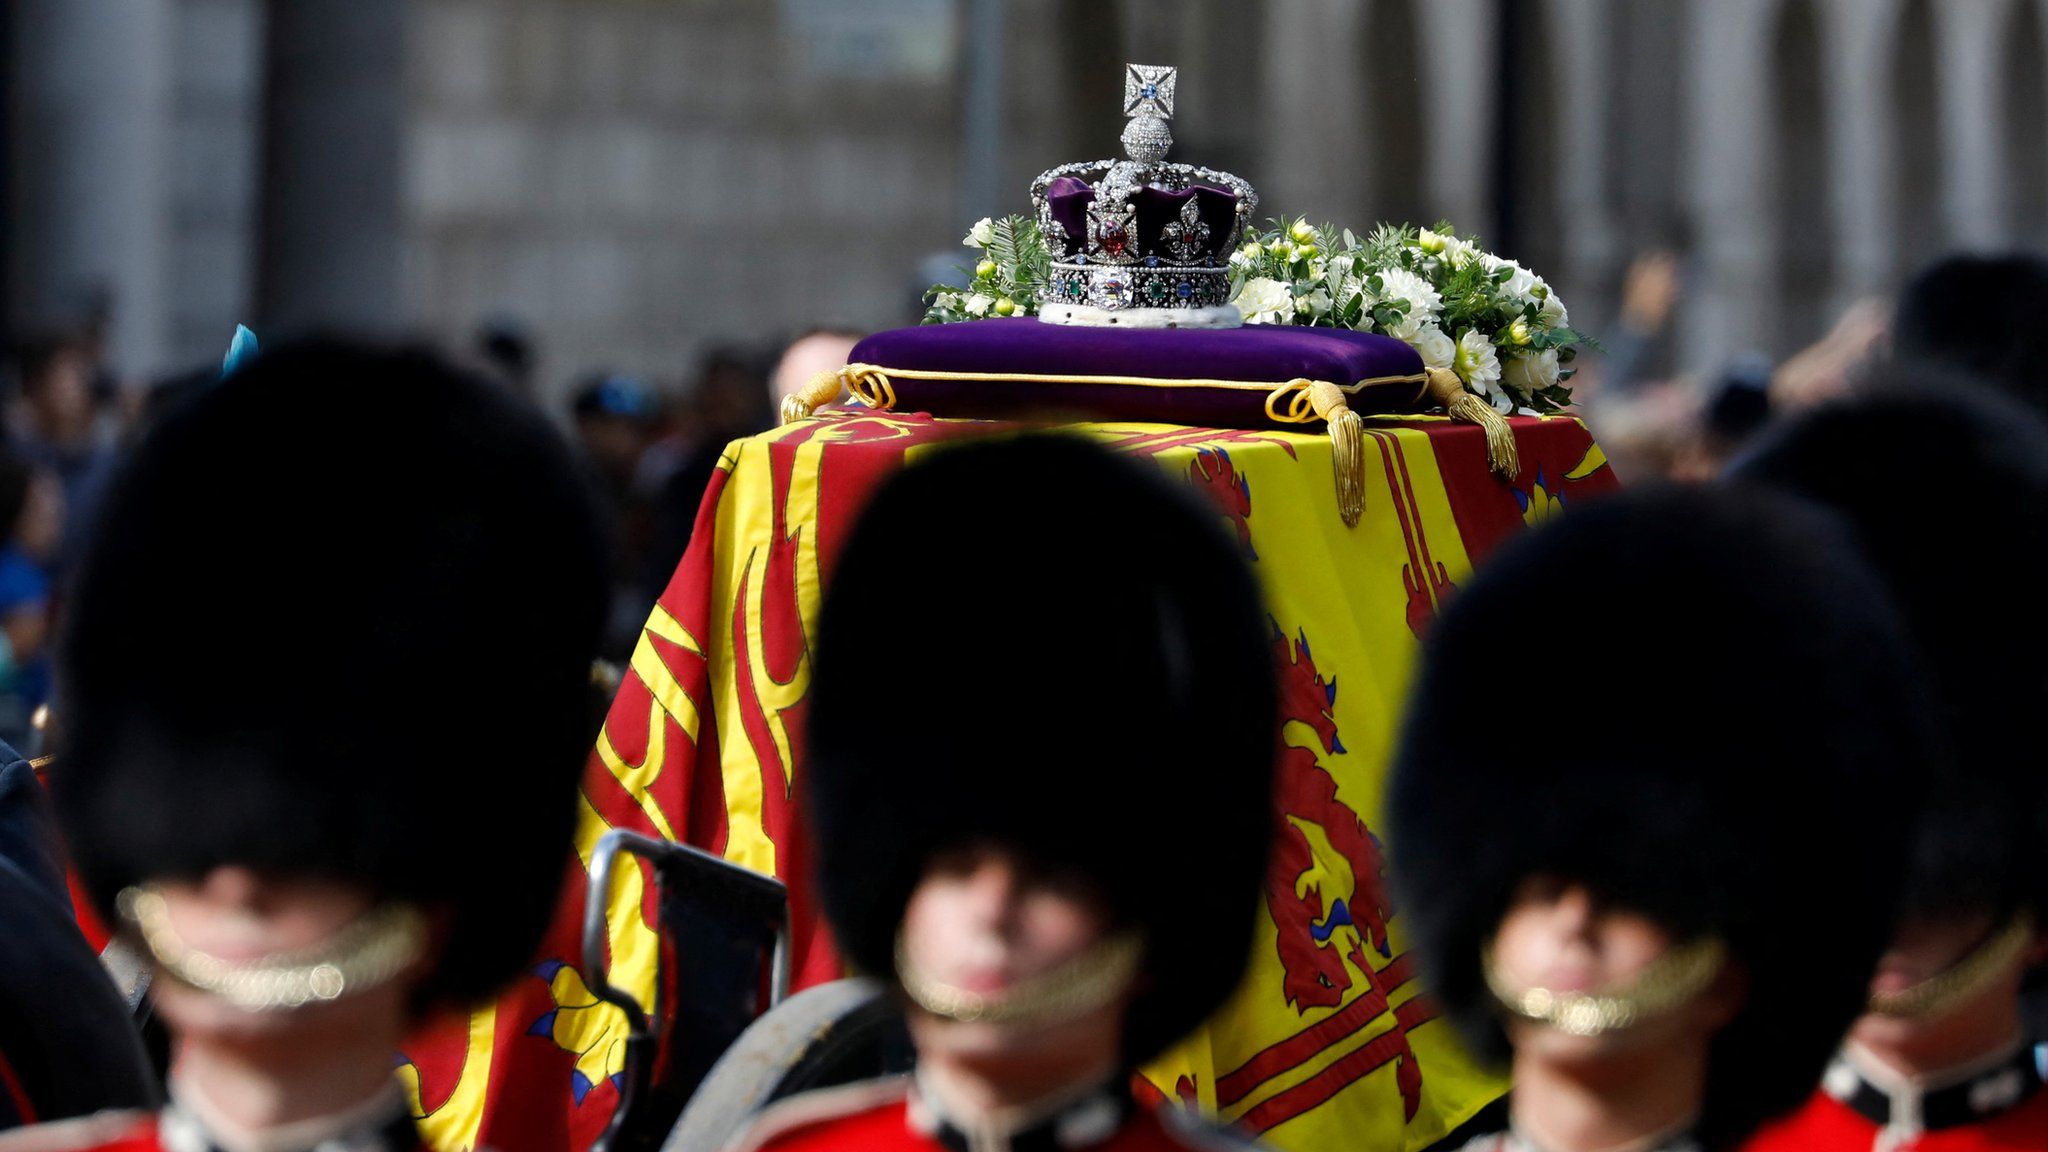 The Imperial State Crown is seen on the coffin carrying Queen Elizabeth II